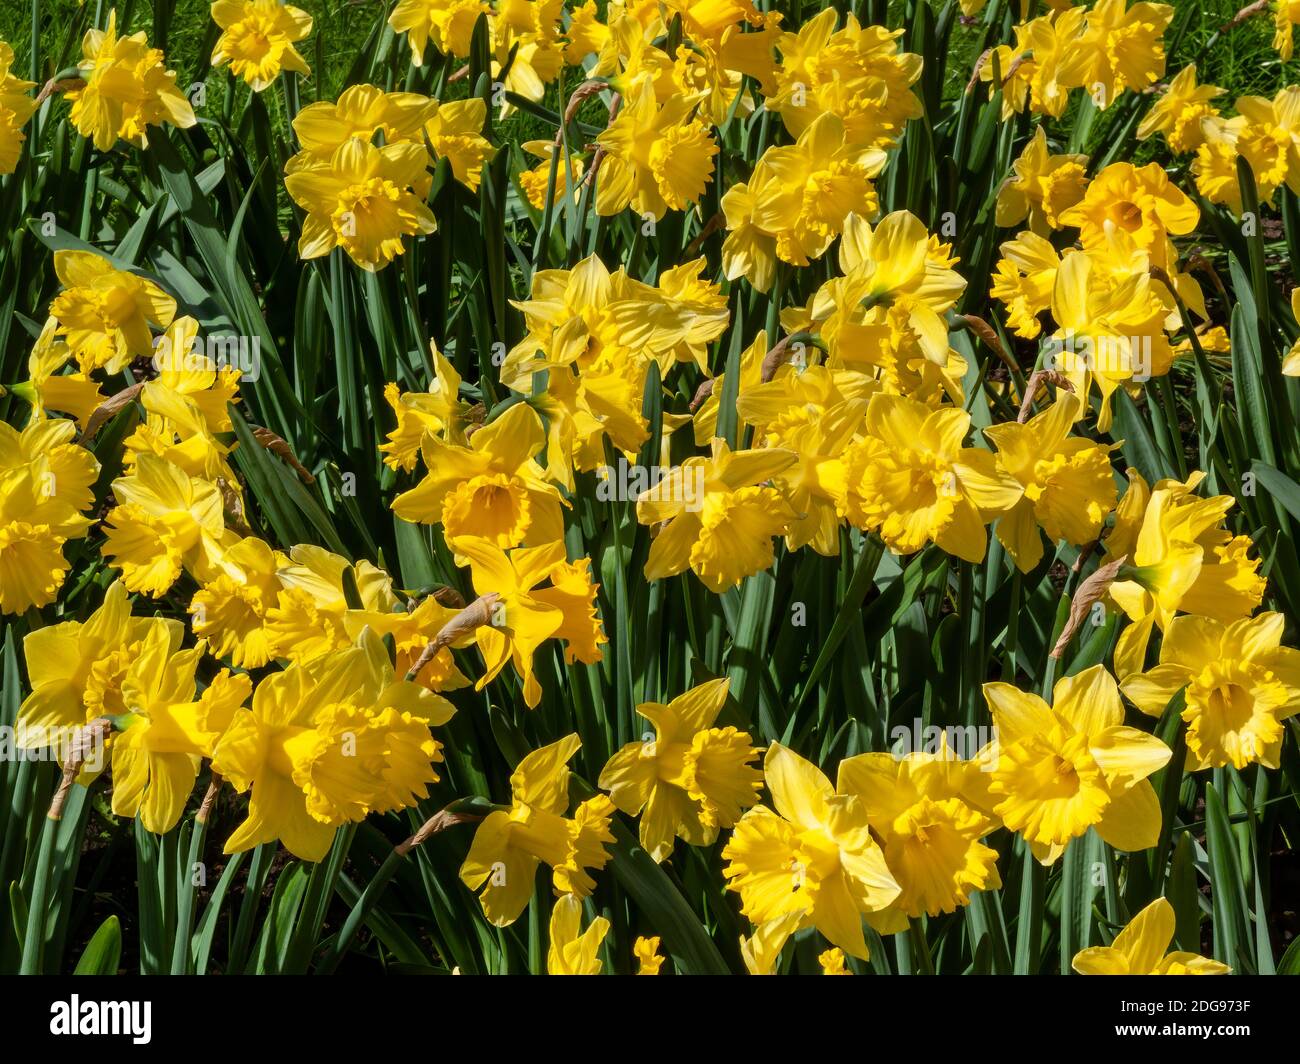 Daffodils (narcissus)  a springtime yellow flower bulb plant growing outdoors in a public park during the spring season, stock photo image Stock Photo